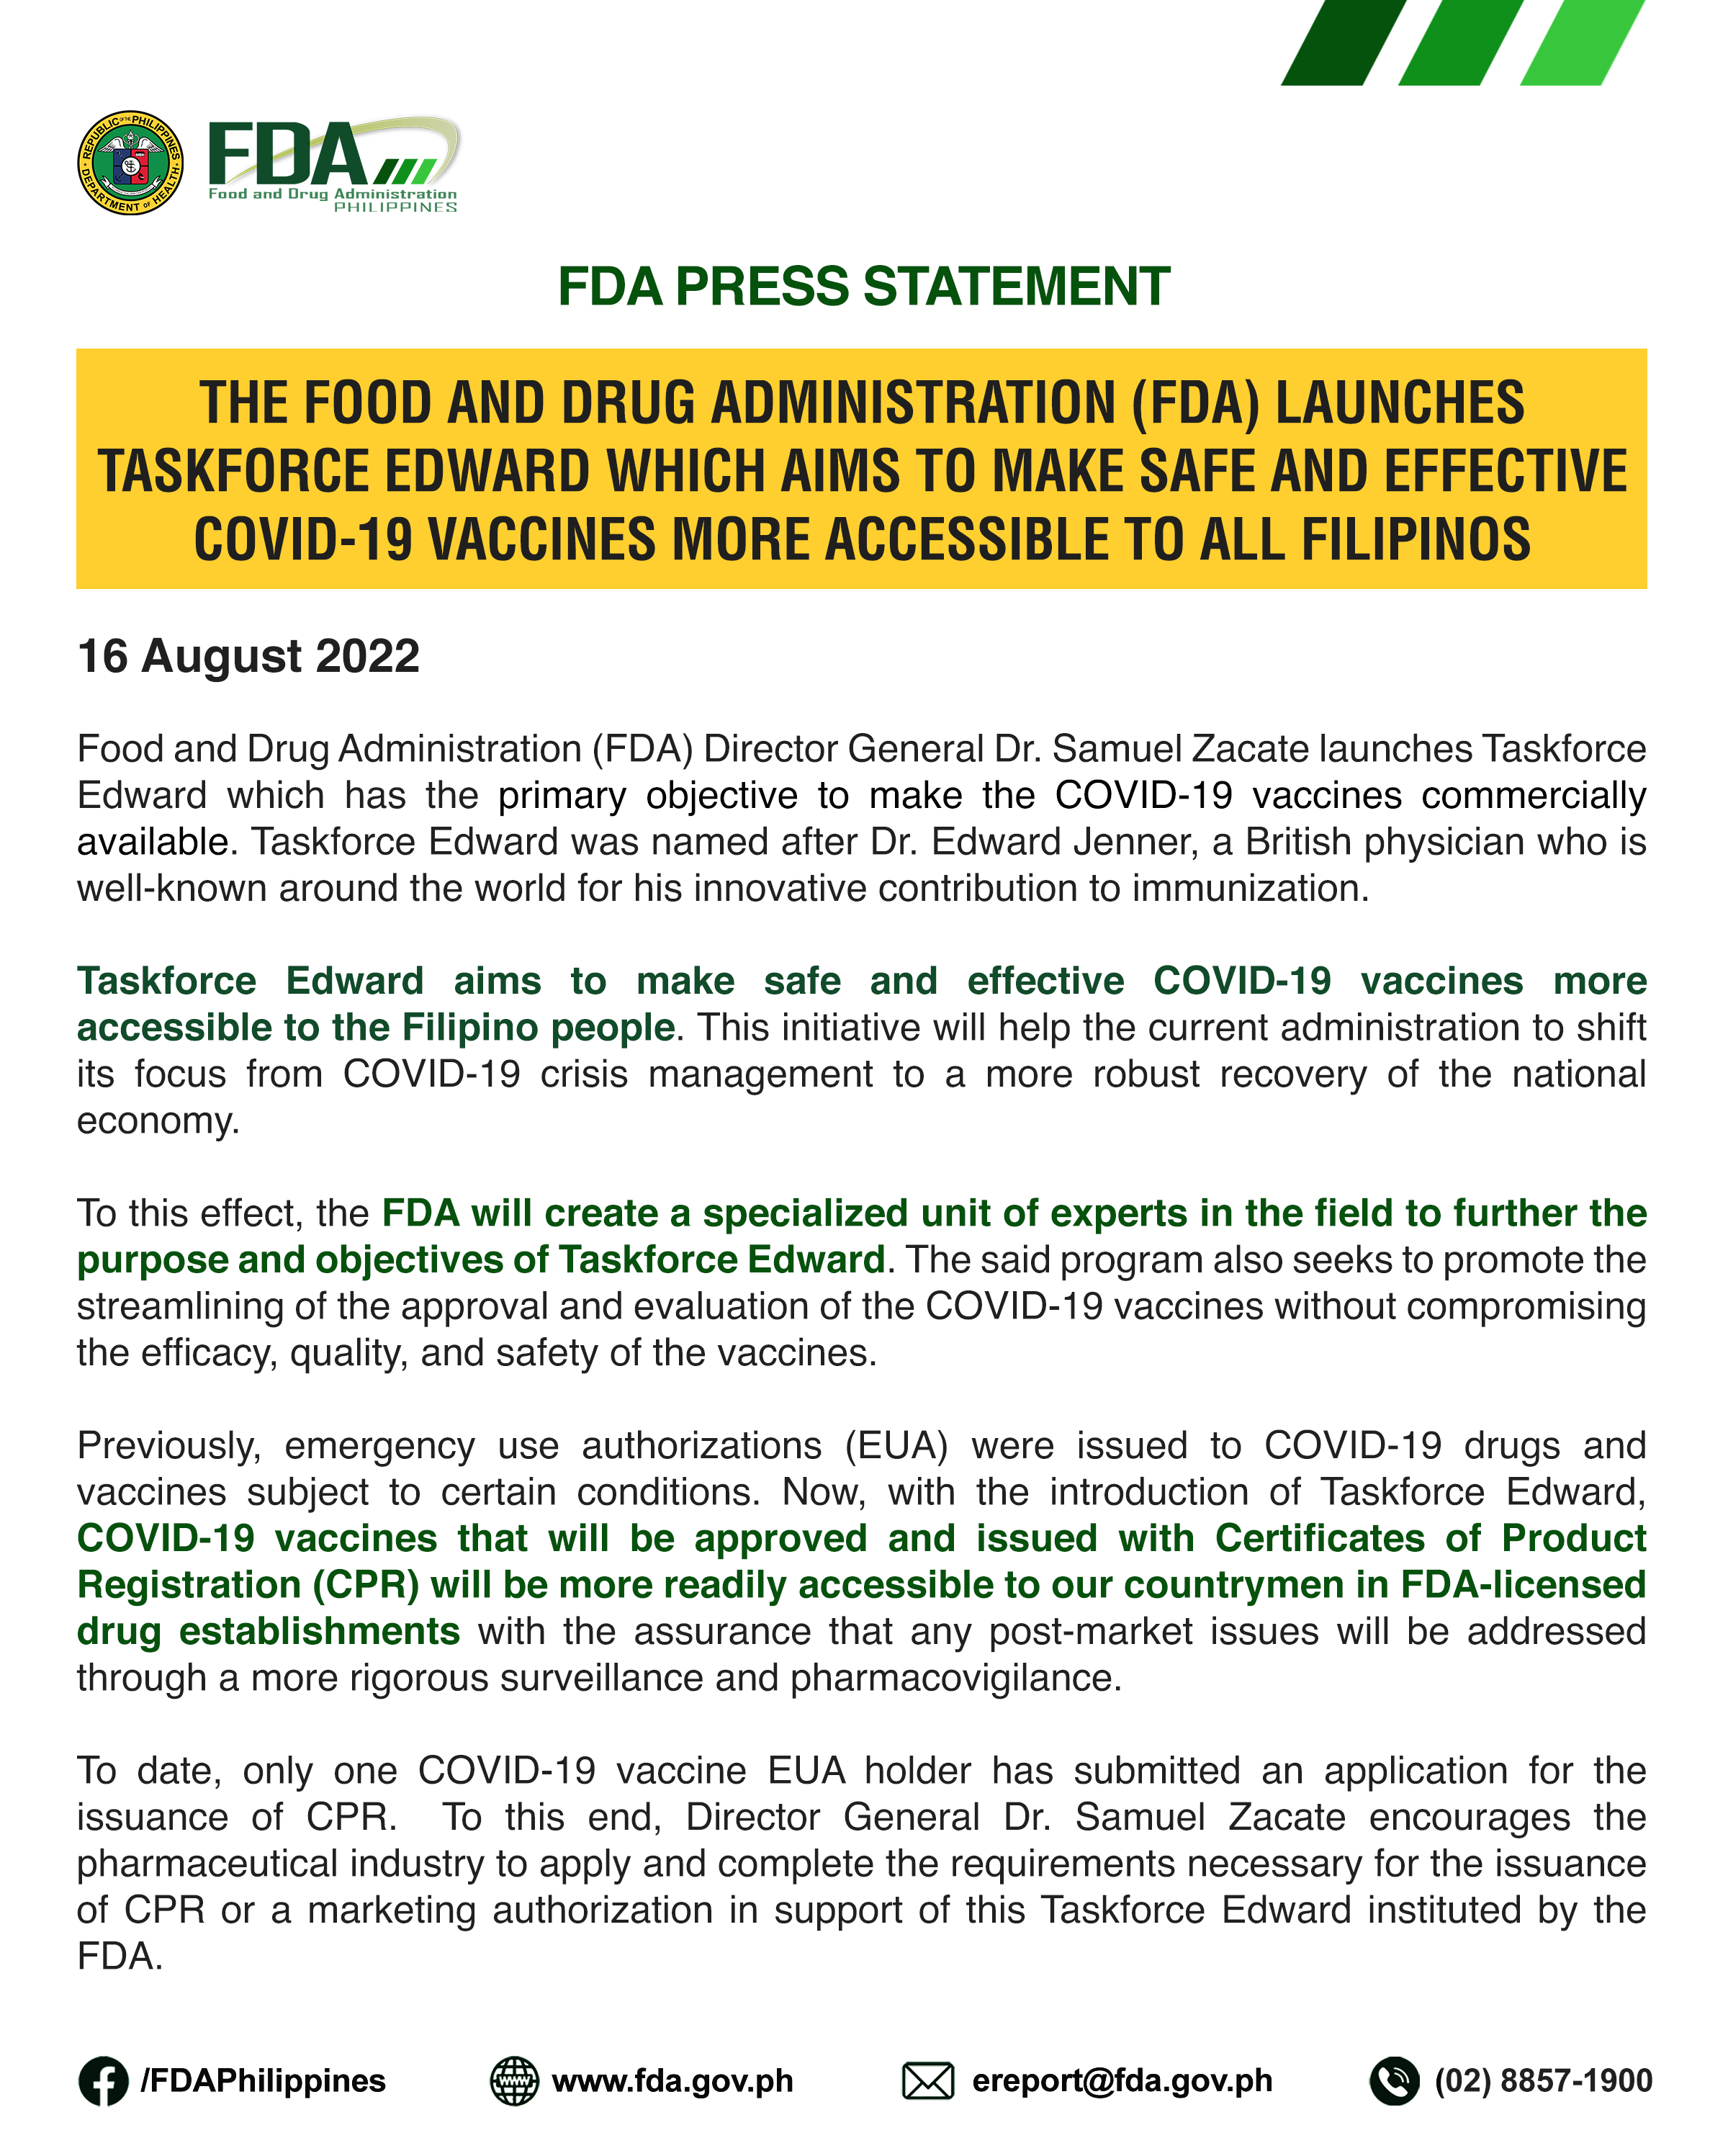 Press Statement || The Food and Drug Administration (FDA) Launches Taskforce Edward Which Aims to Make Safe and Effective COVID-19 Vaccines More Accessible to All Filipinos